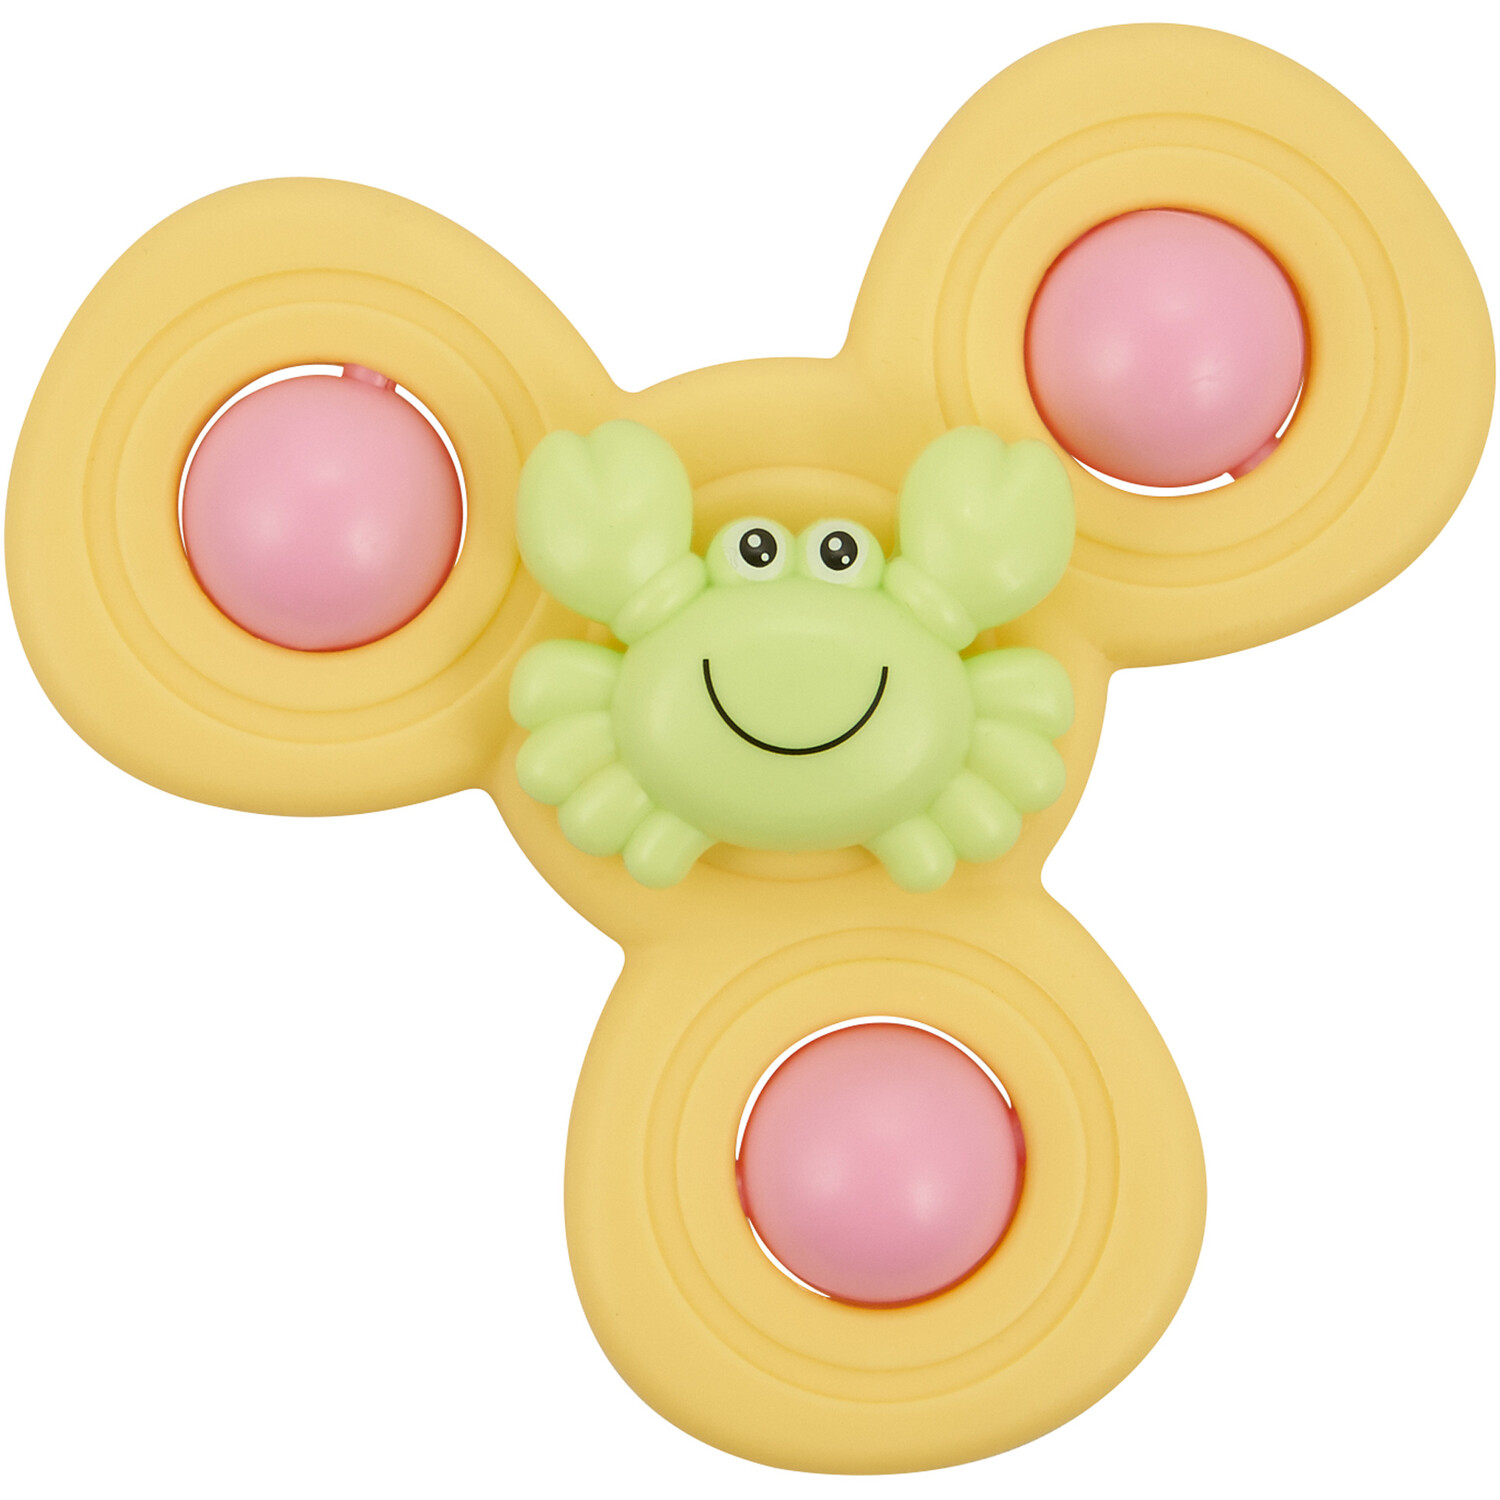 ToyMania Suction Spinners Bath Toy 3 Pack Image 4